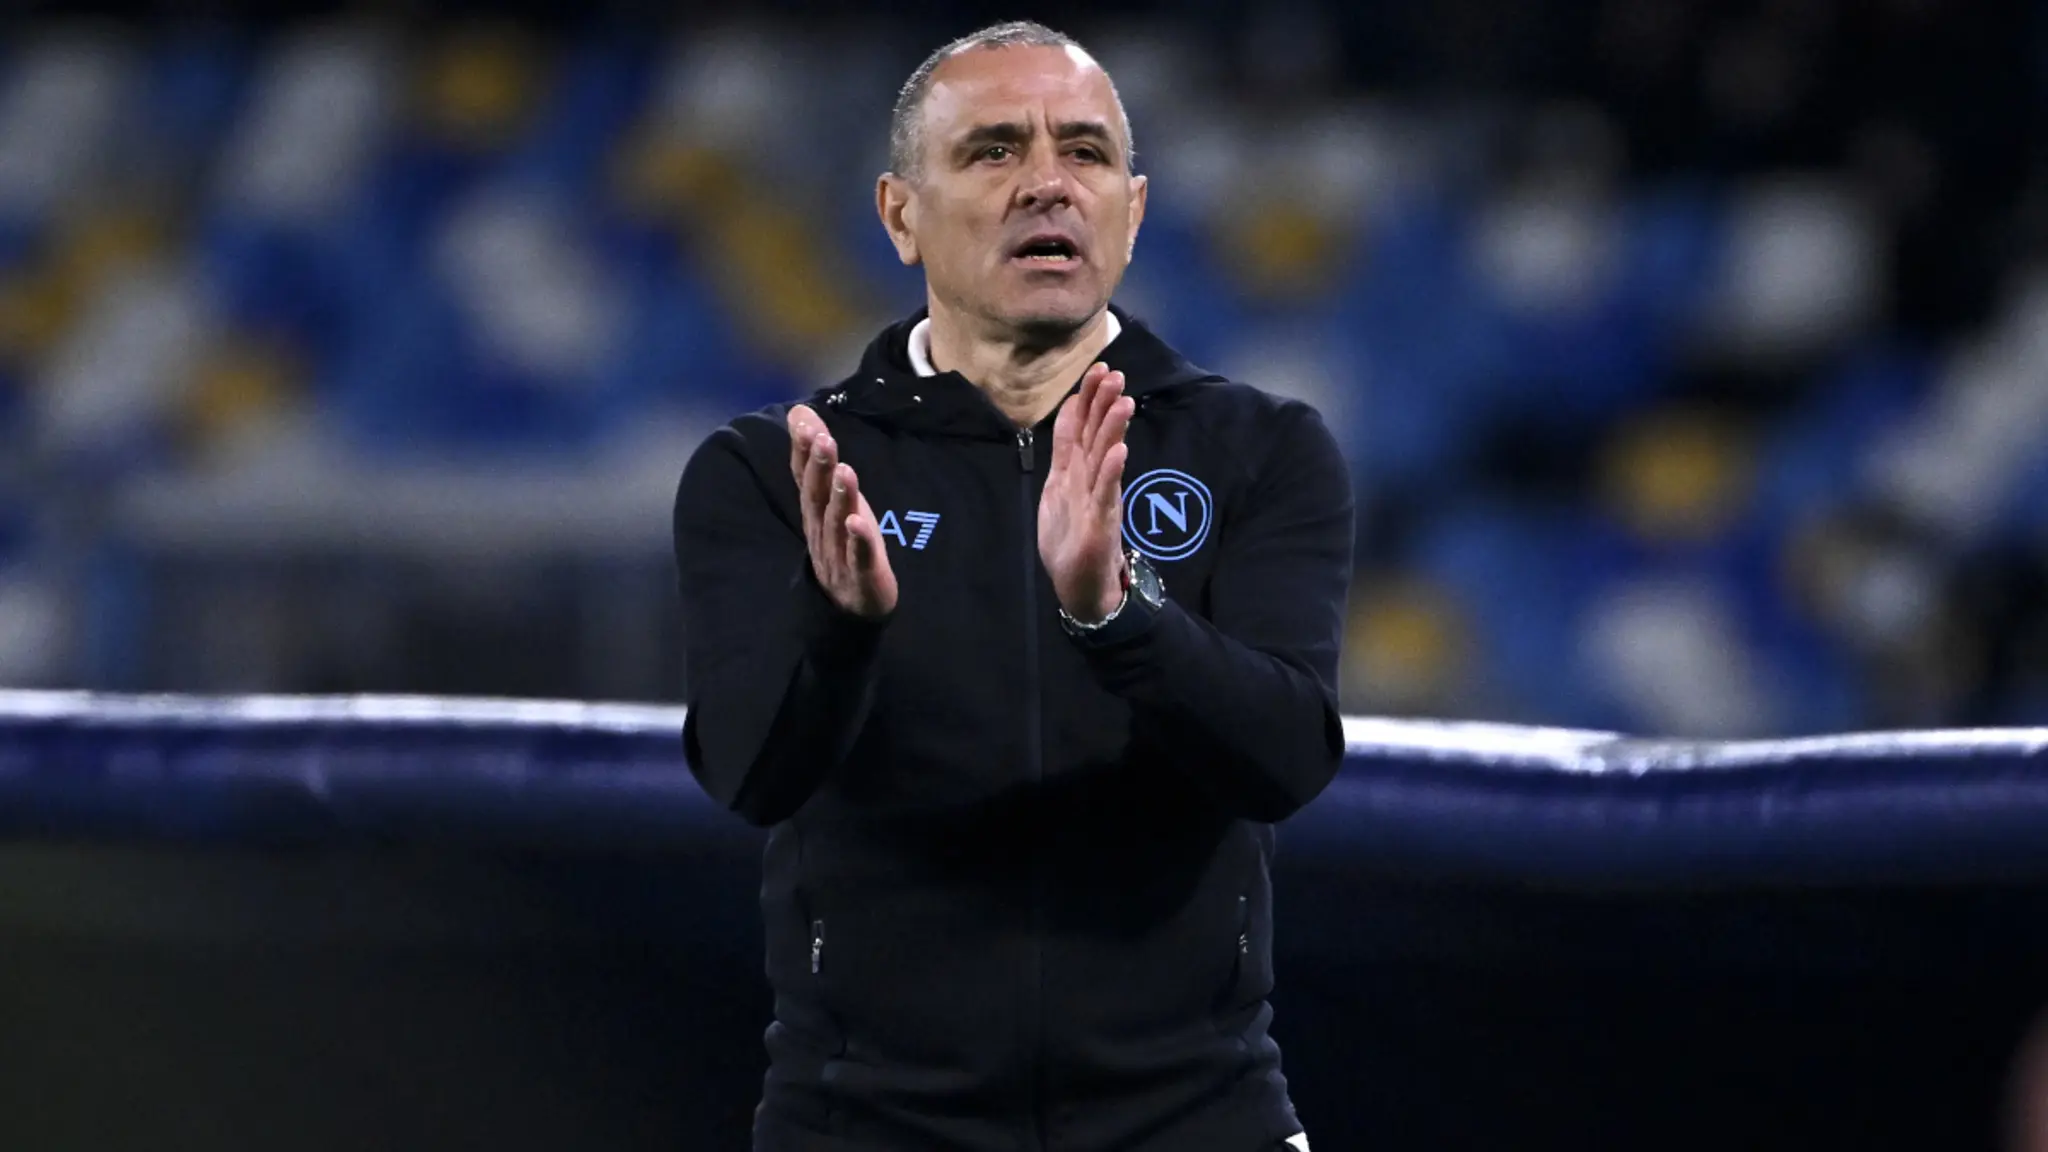 Nobody would be happier than Aurelio De Laurentiis if Francesco Calzona righted the ship and earned his confirmation on the Napoli bench